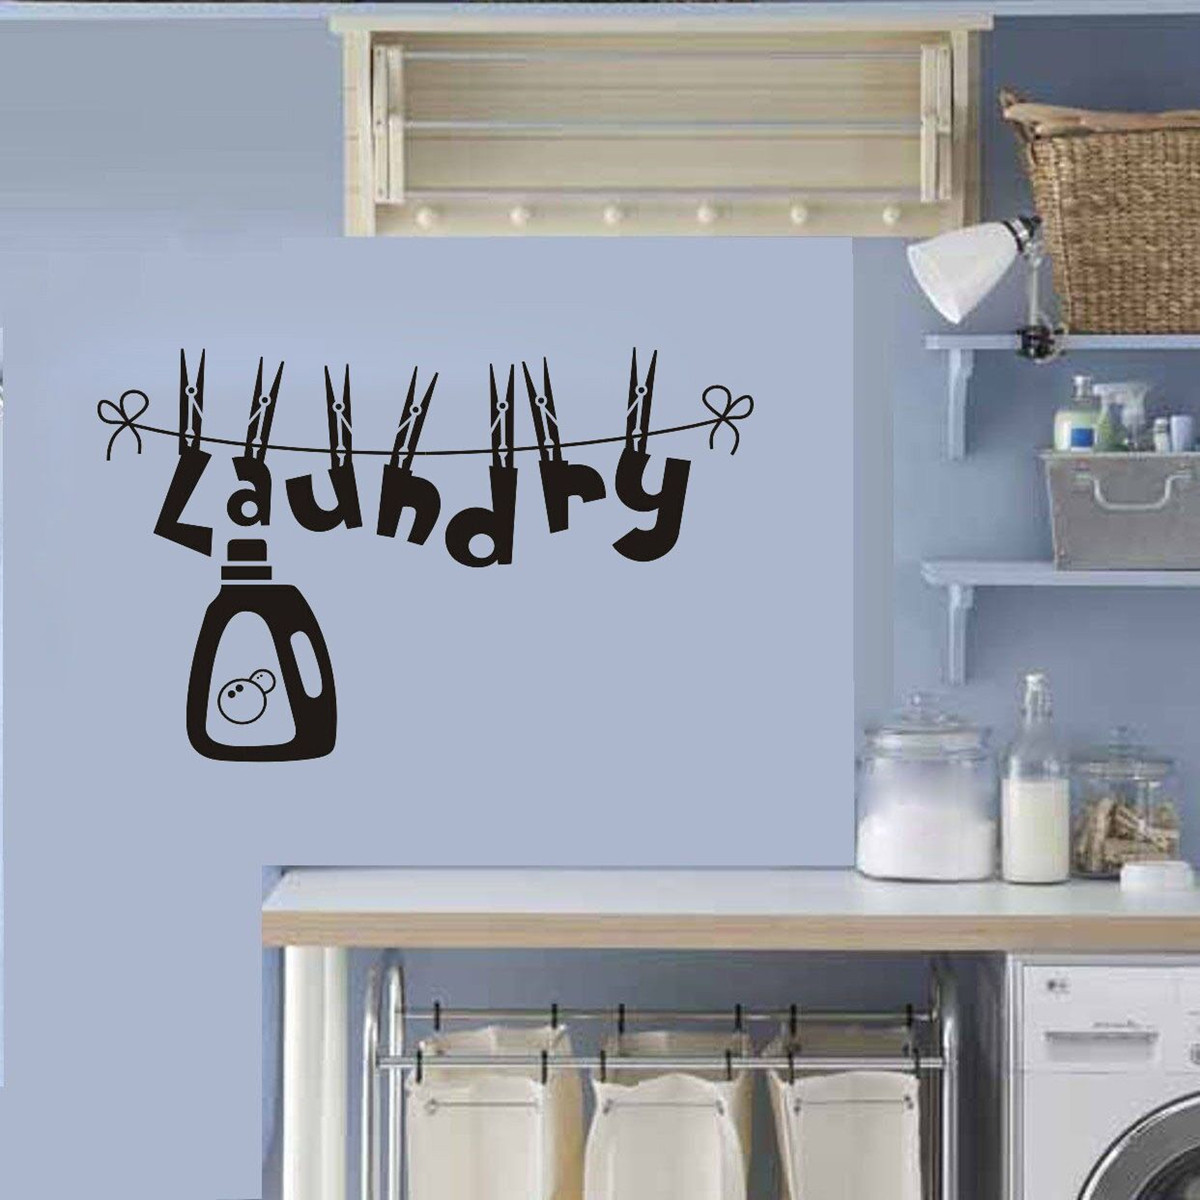 Laundry-Room-Wall-Sticker-PVC-Waterproof-Removable-Wall-Sticker-Painting-Home-Decor-1719040-6